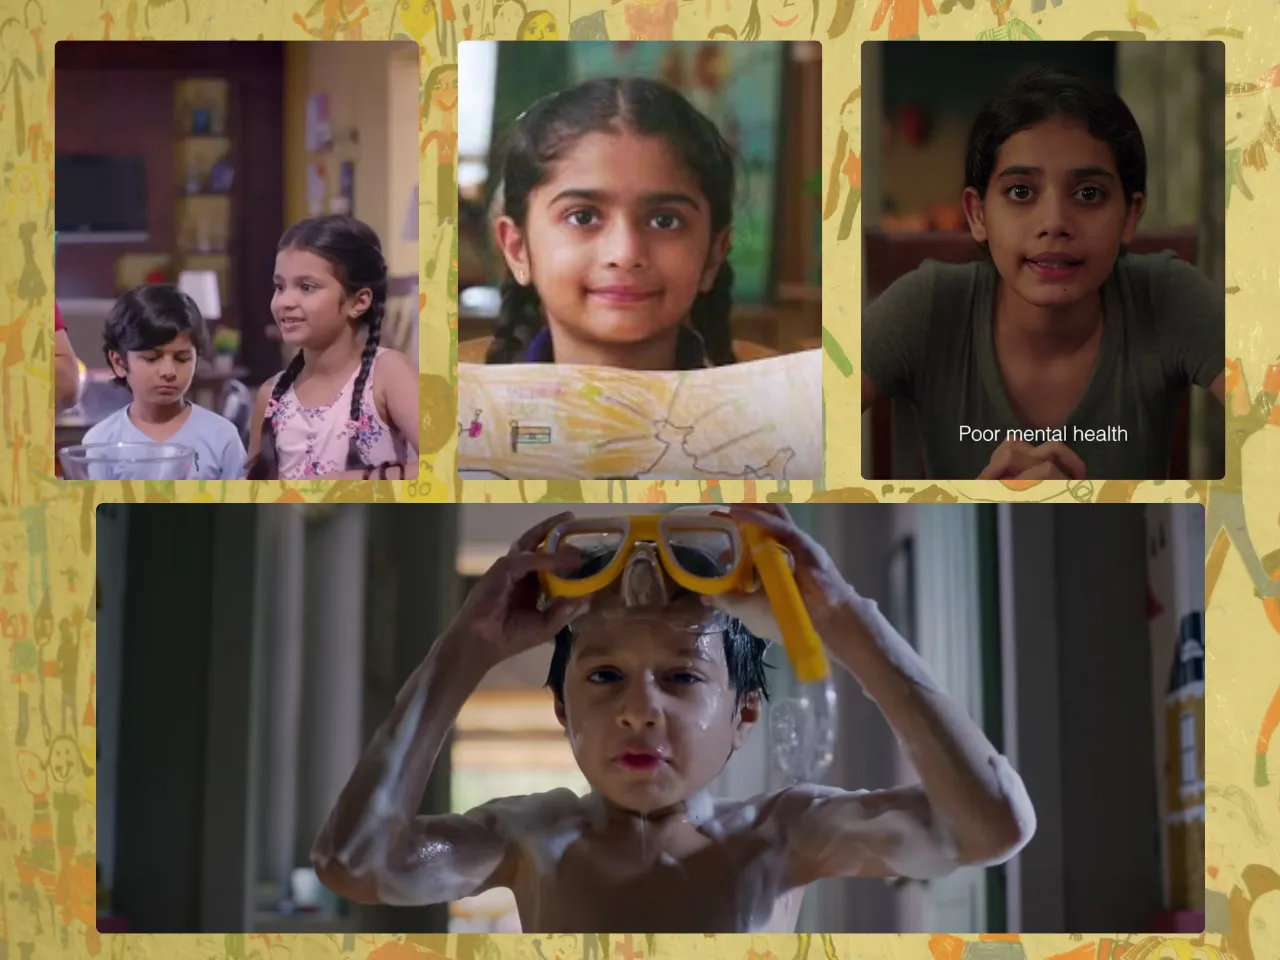 Evergreen Children's Day campaigns that capture childhood innocence